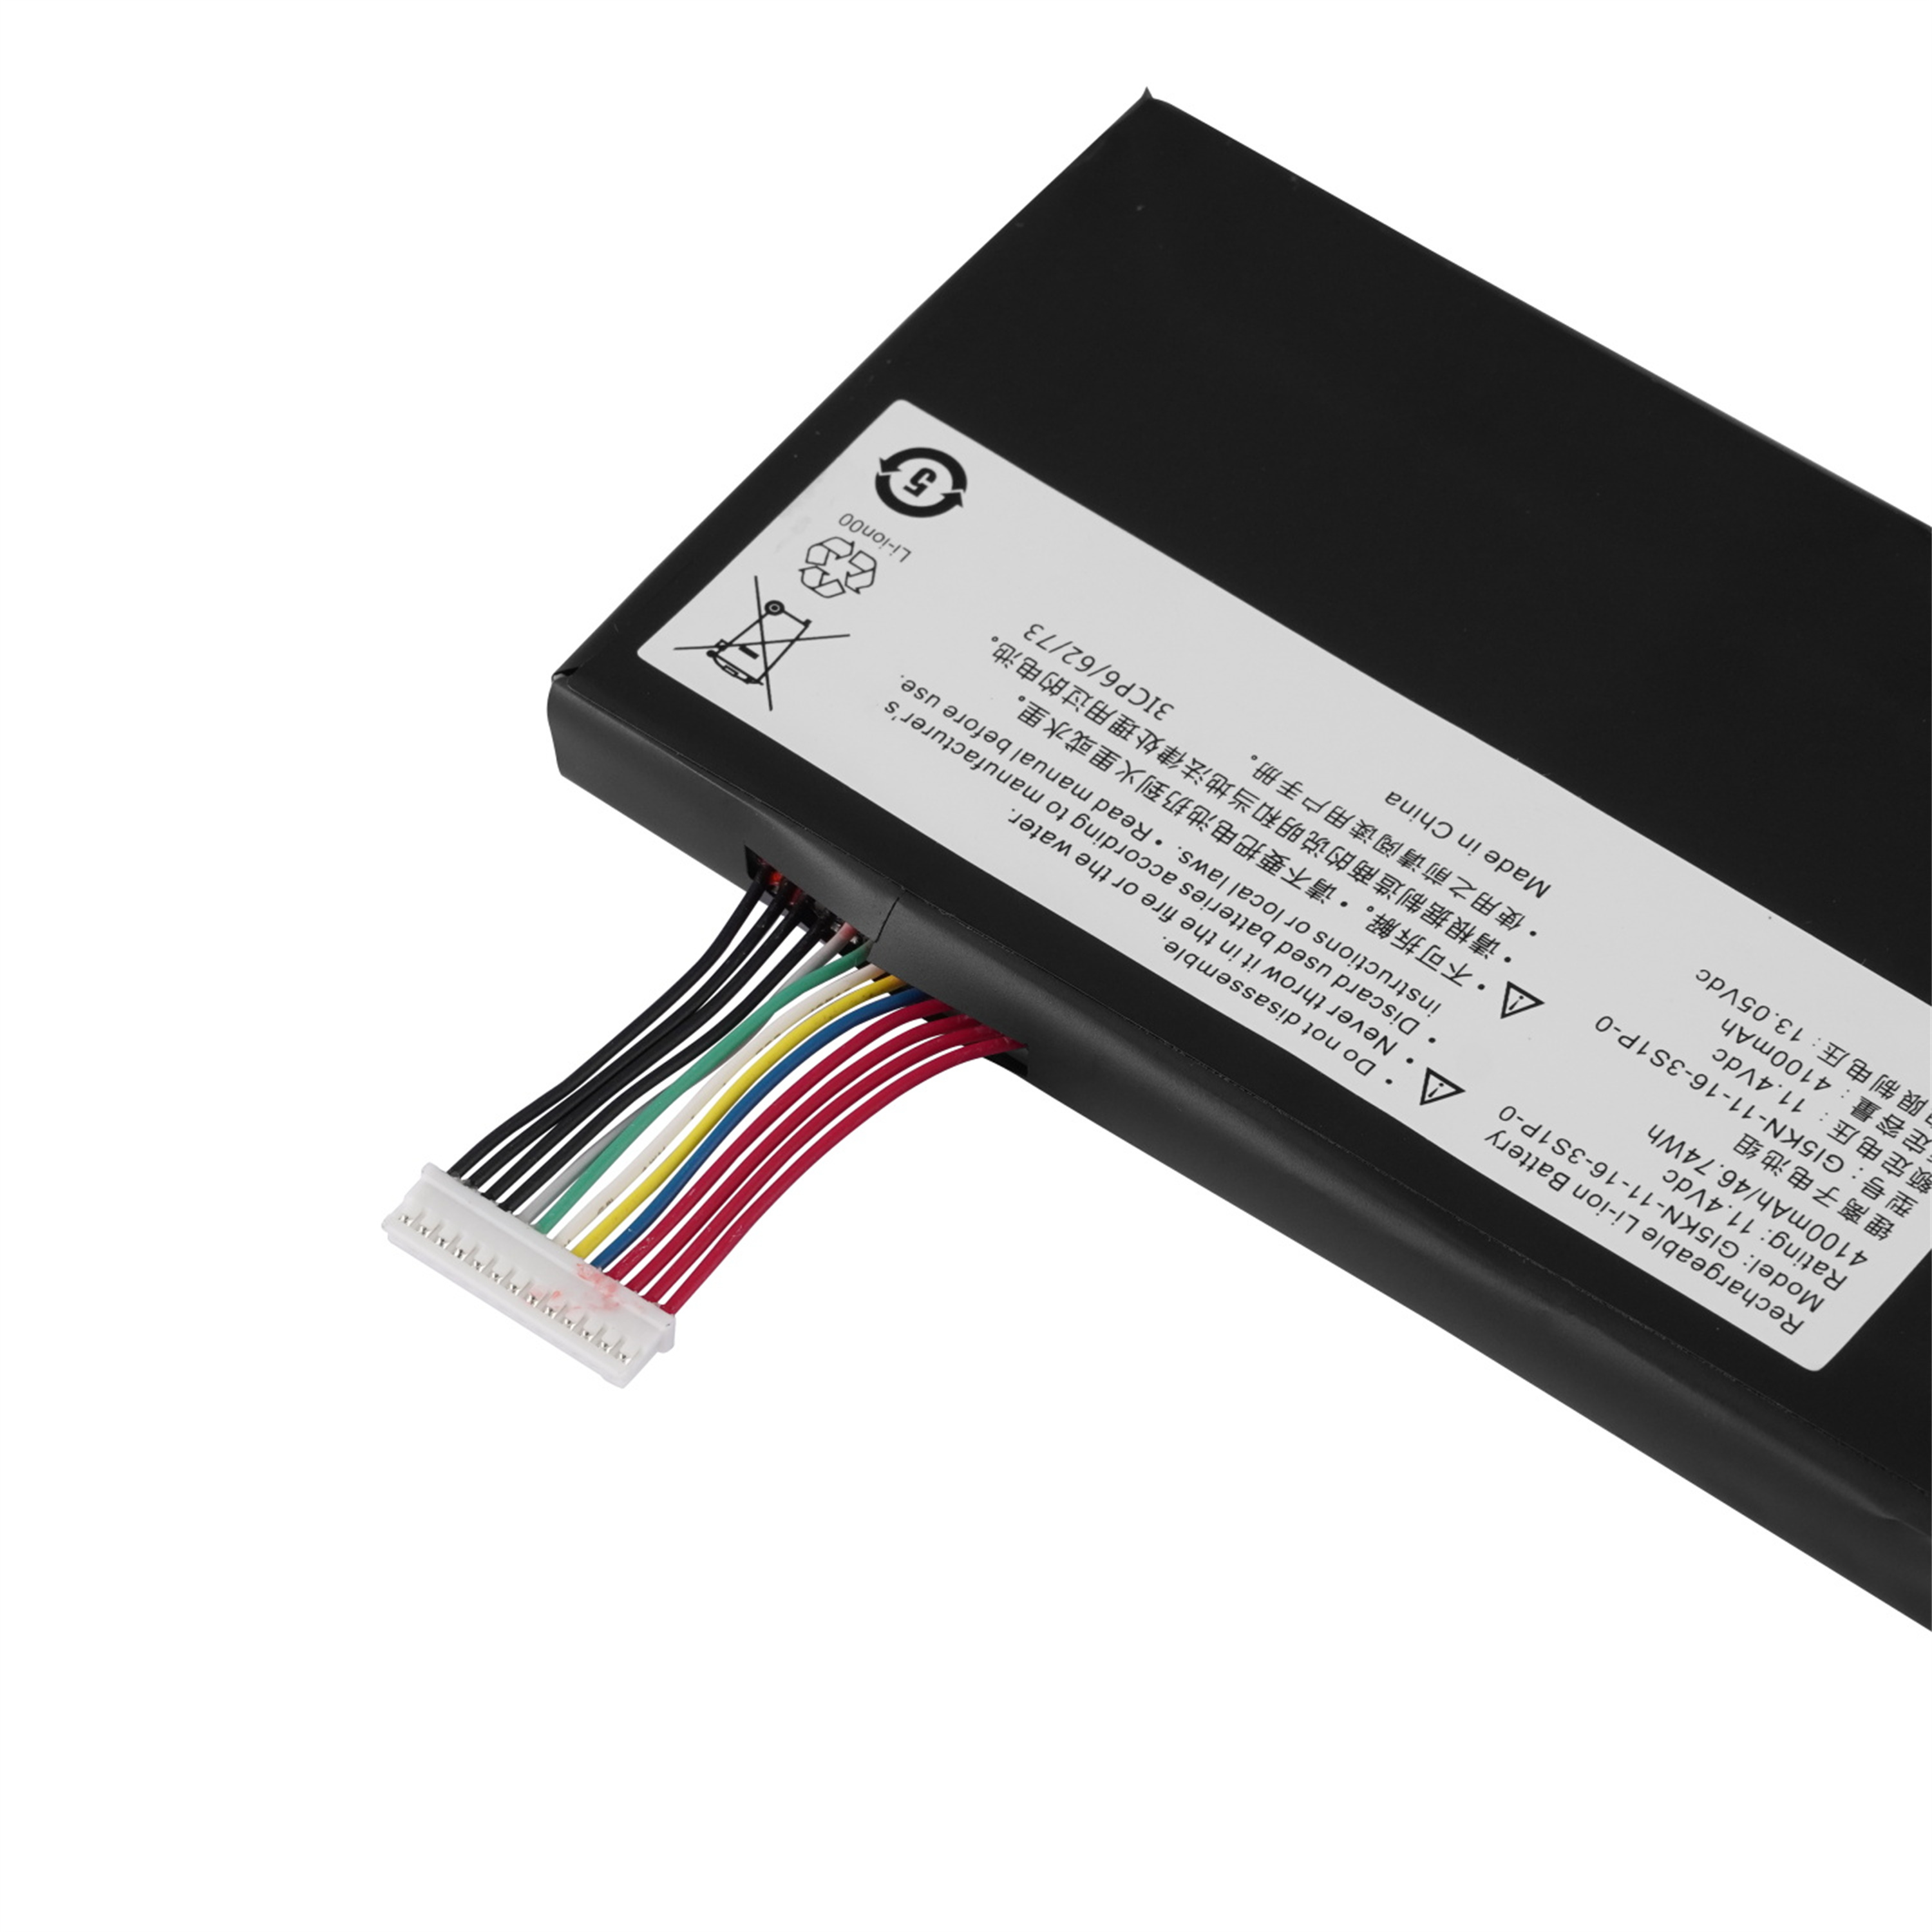 G15KN-11-16-3S1P-0 rechargeable lithium ion Notebook battery Laptop battery 11.4V 46.74WH 4100MAH